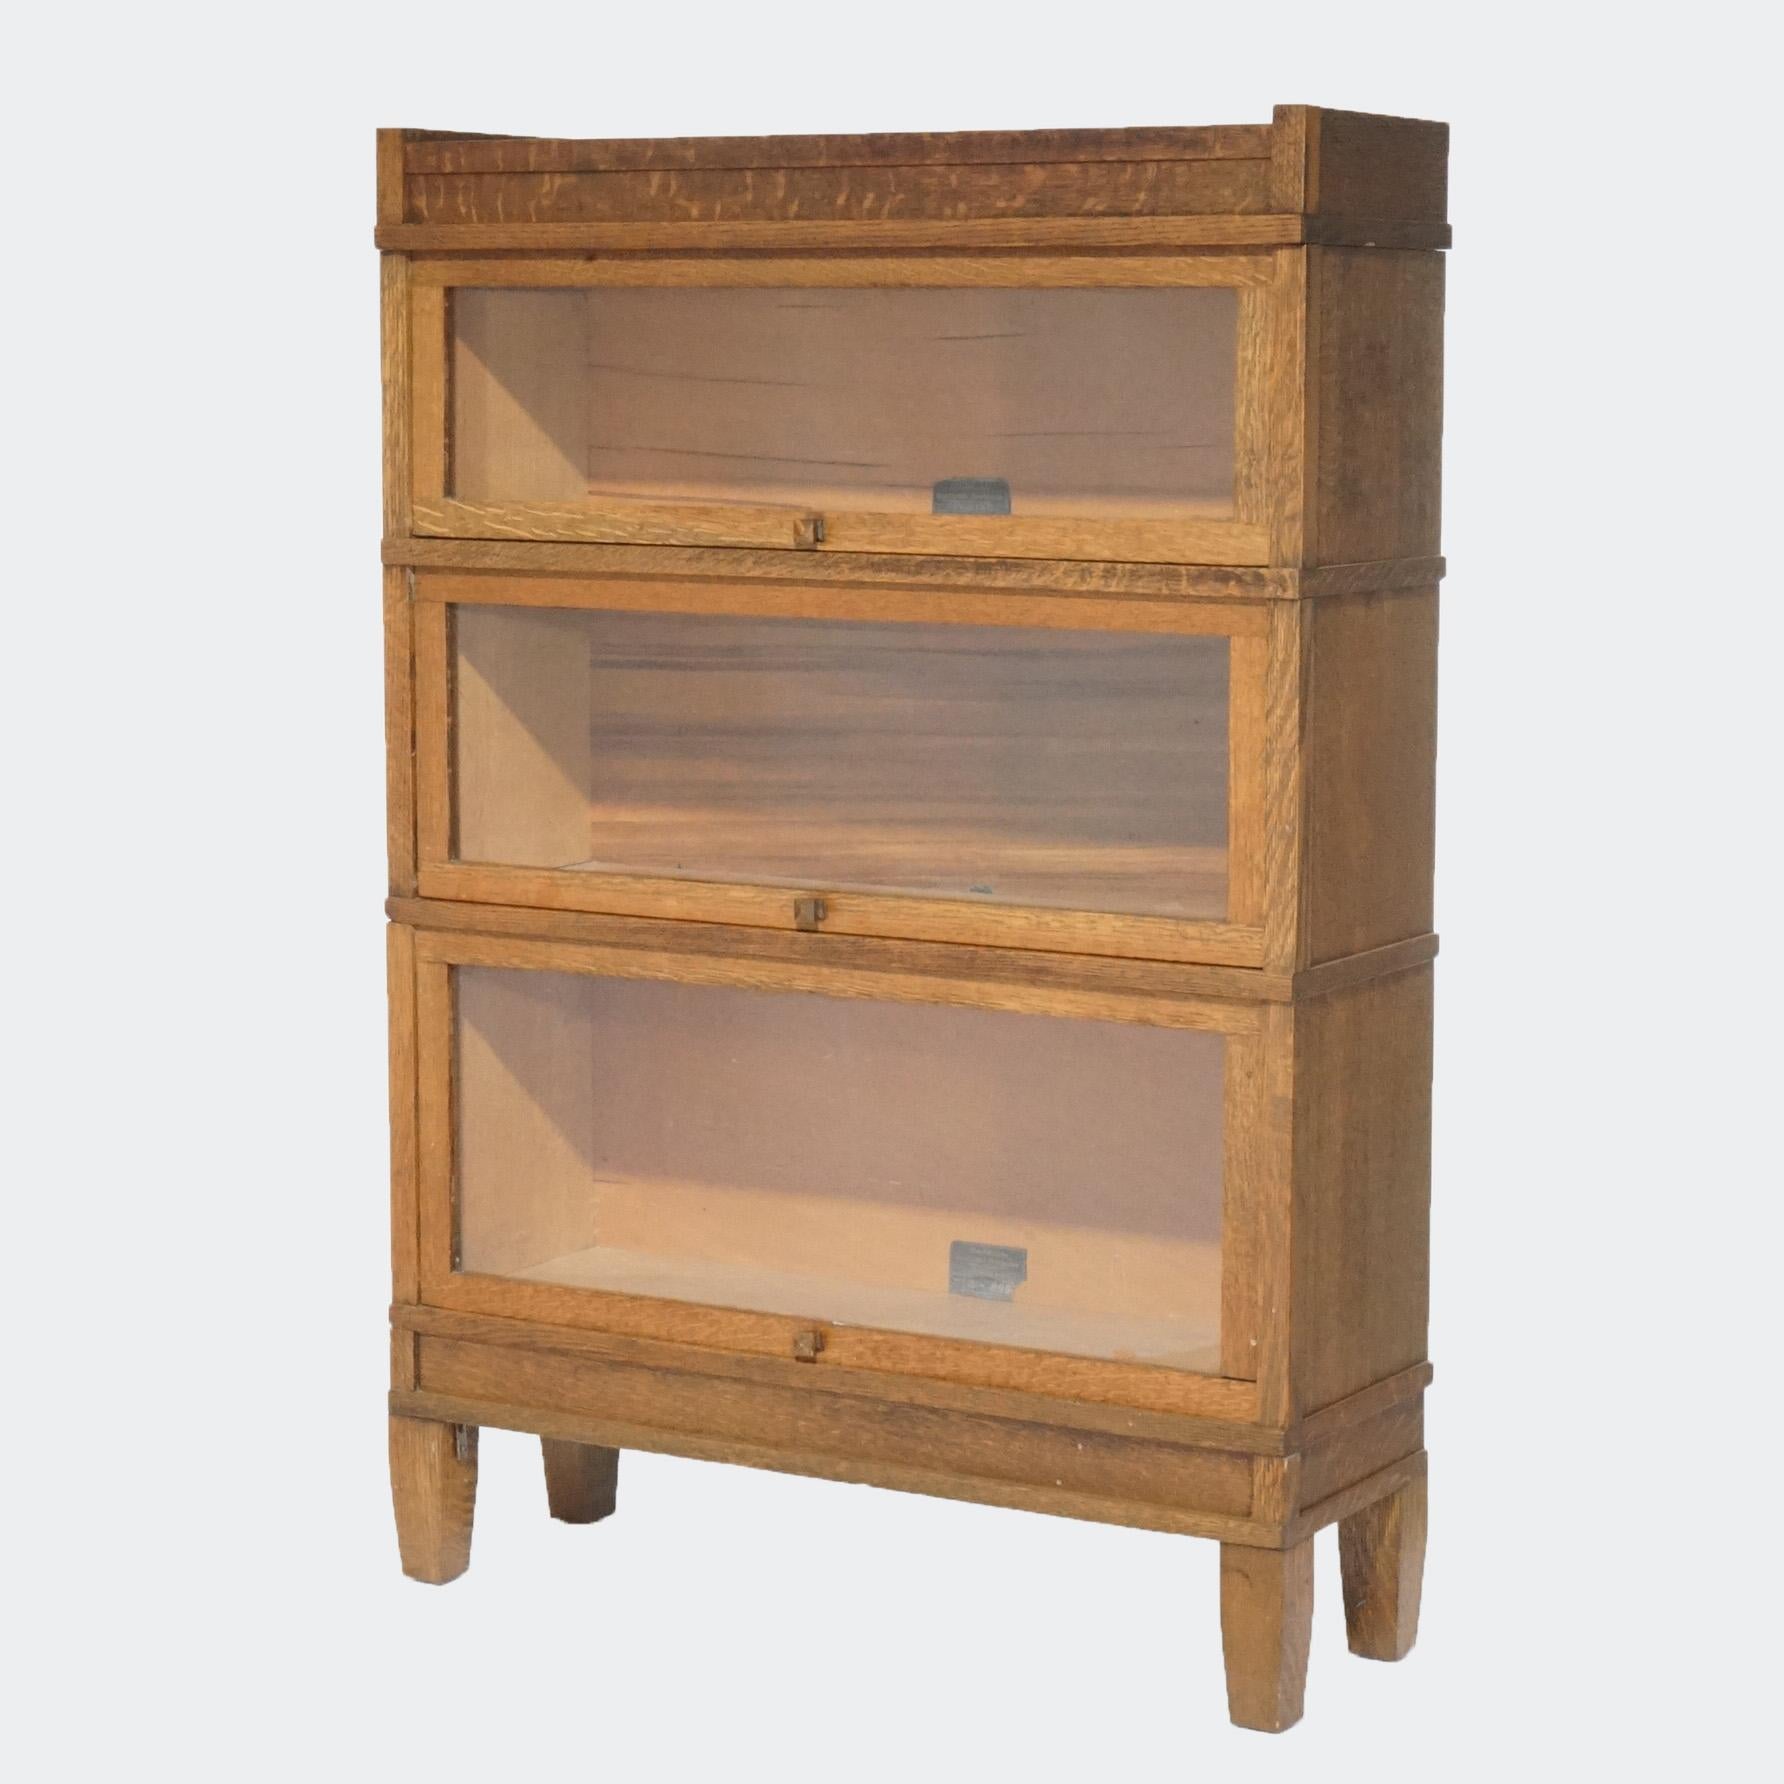 Antique Arts and Crafts barrister bookcase by Globe Wernicke offers oak construction with three stacks, each having a pull out glass door, raised on straight legs, maker label as photographed, c1910

Measures - 50.5